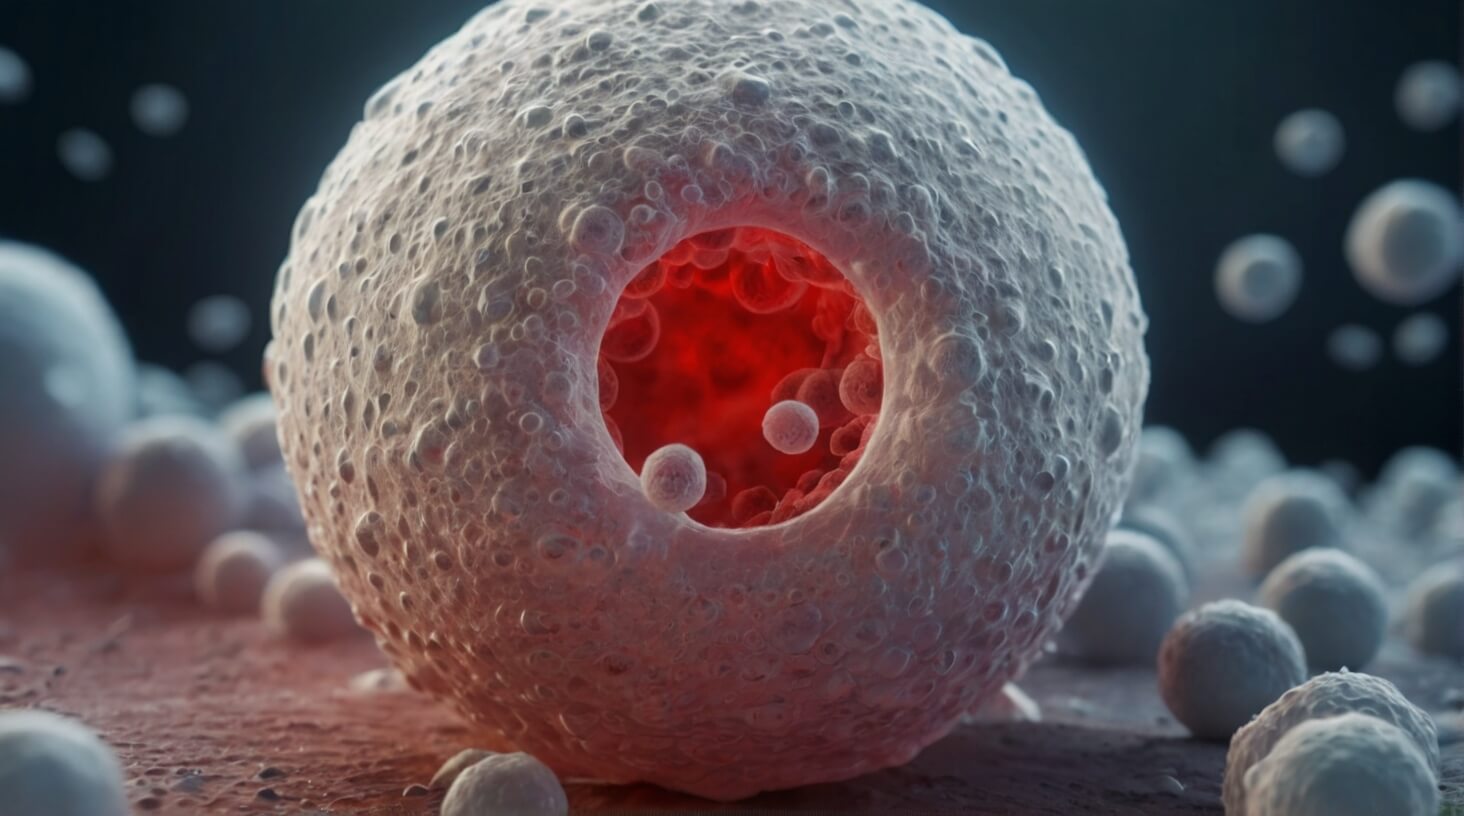 Illustration depicting white blood cells in a bloodstream